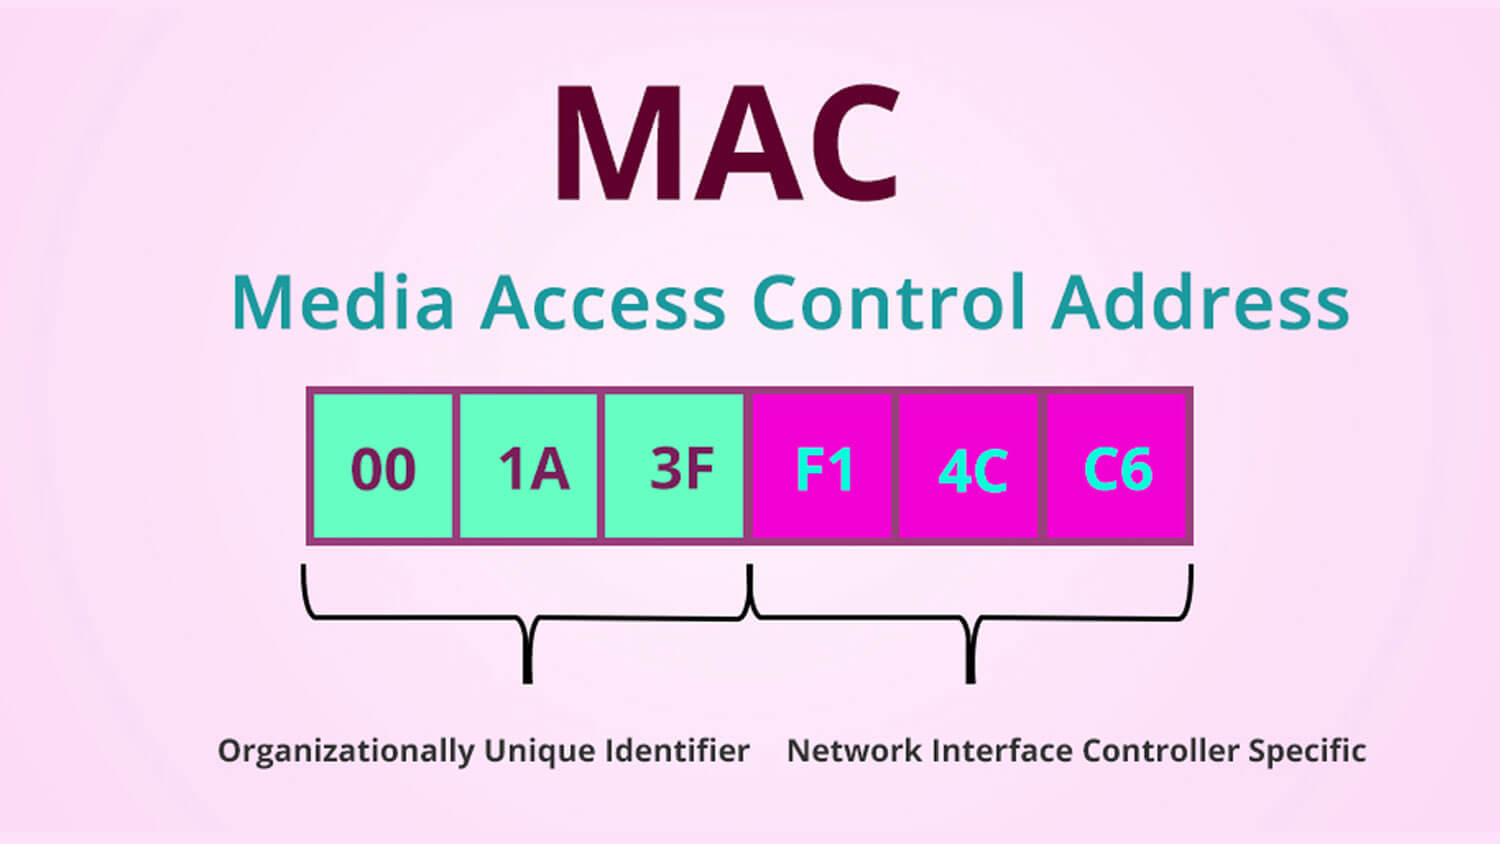 how to find out your mac address